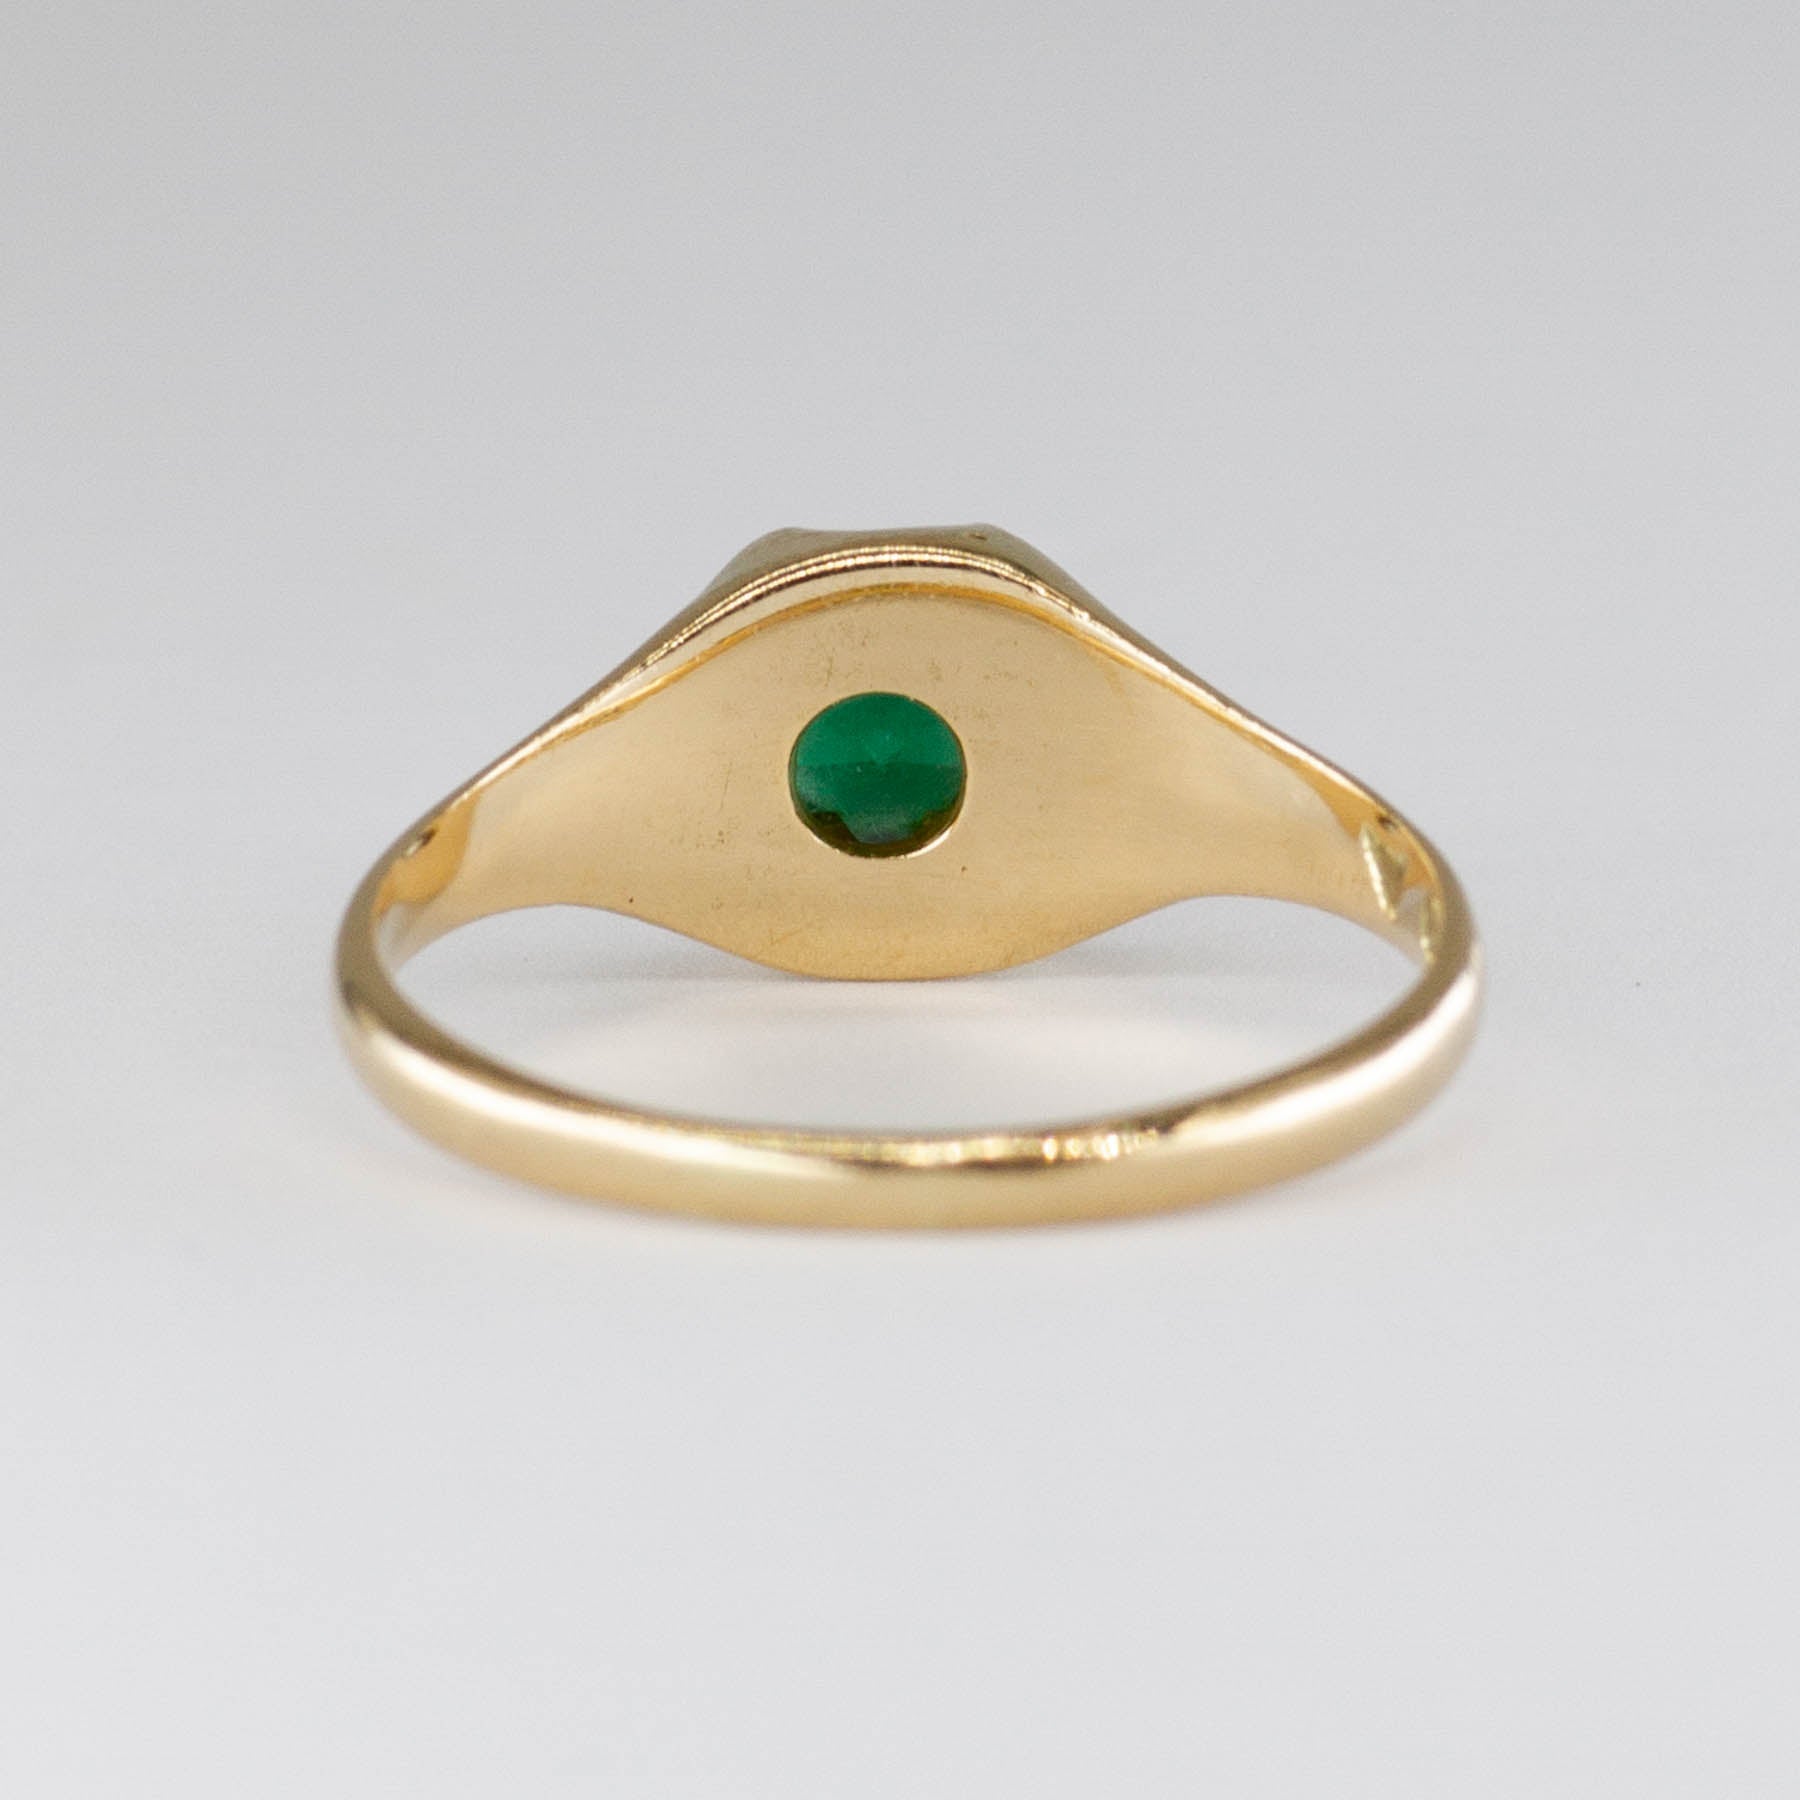 Vintage Green Glass Doublet 14k Ring | 0.50ct | SZ 4.75 |